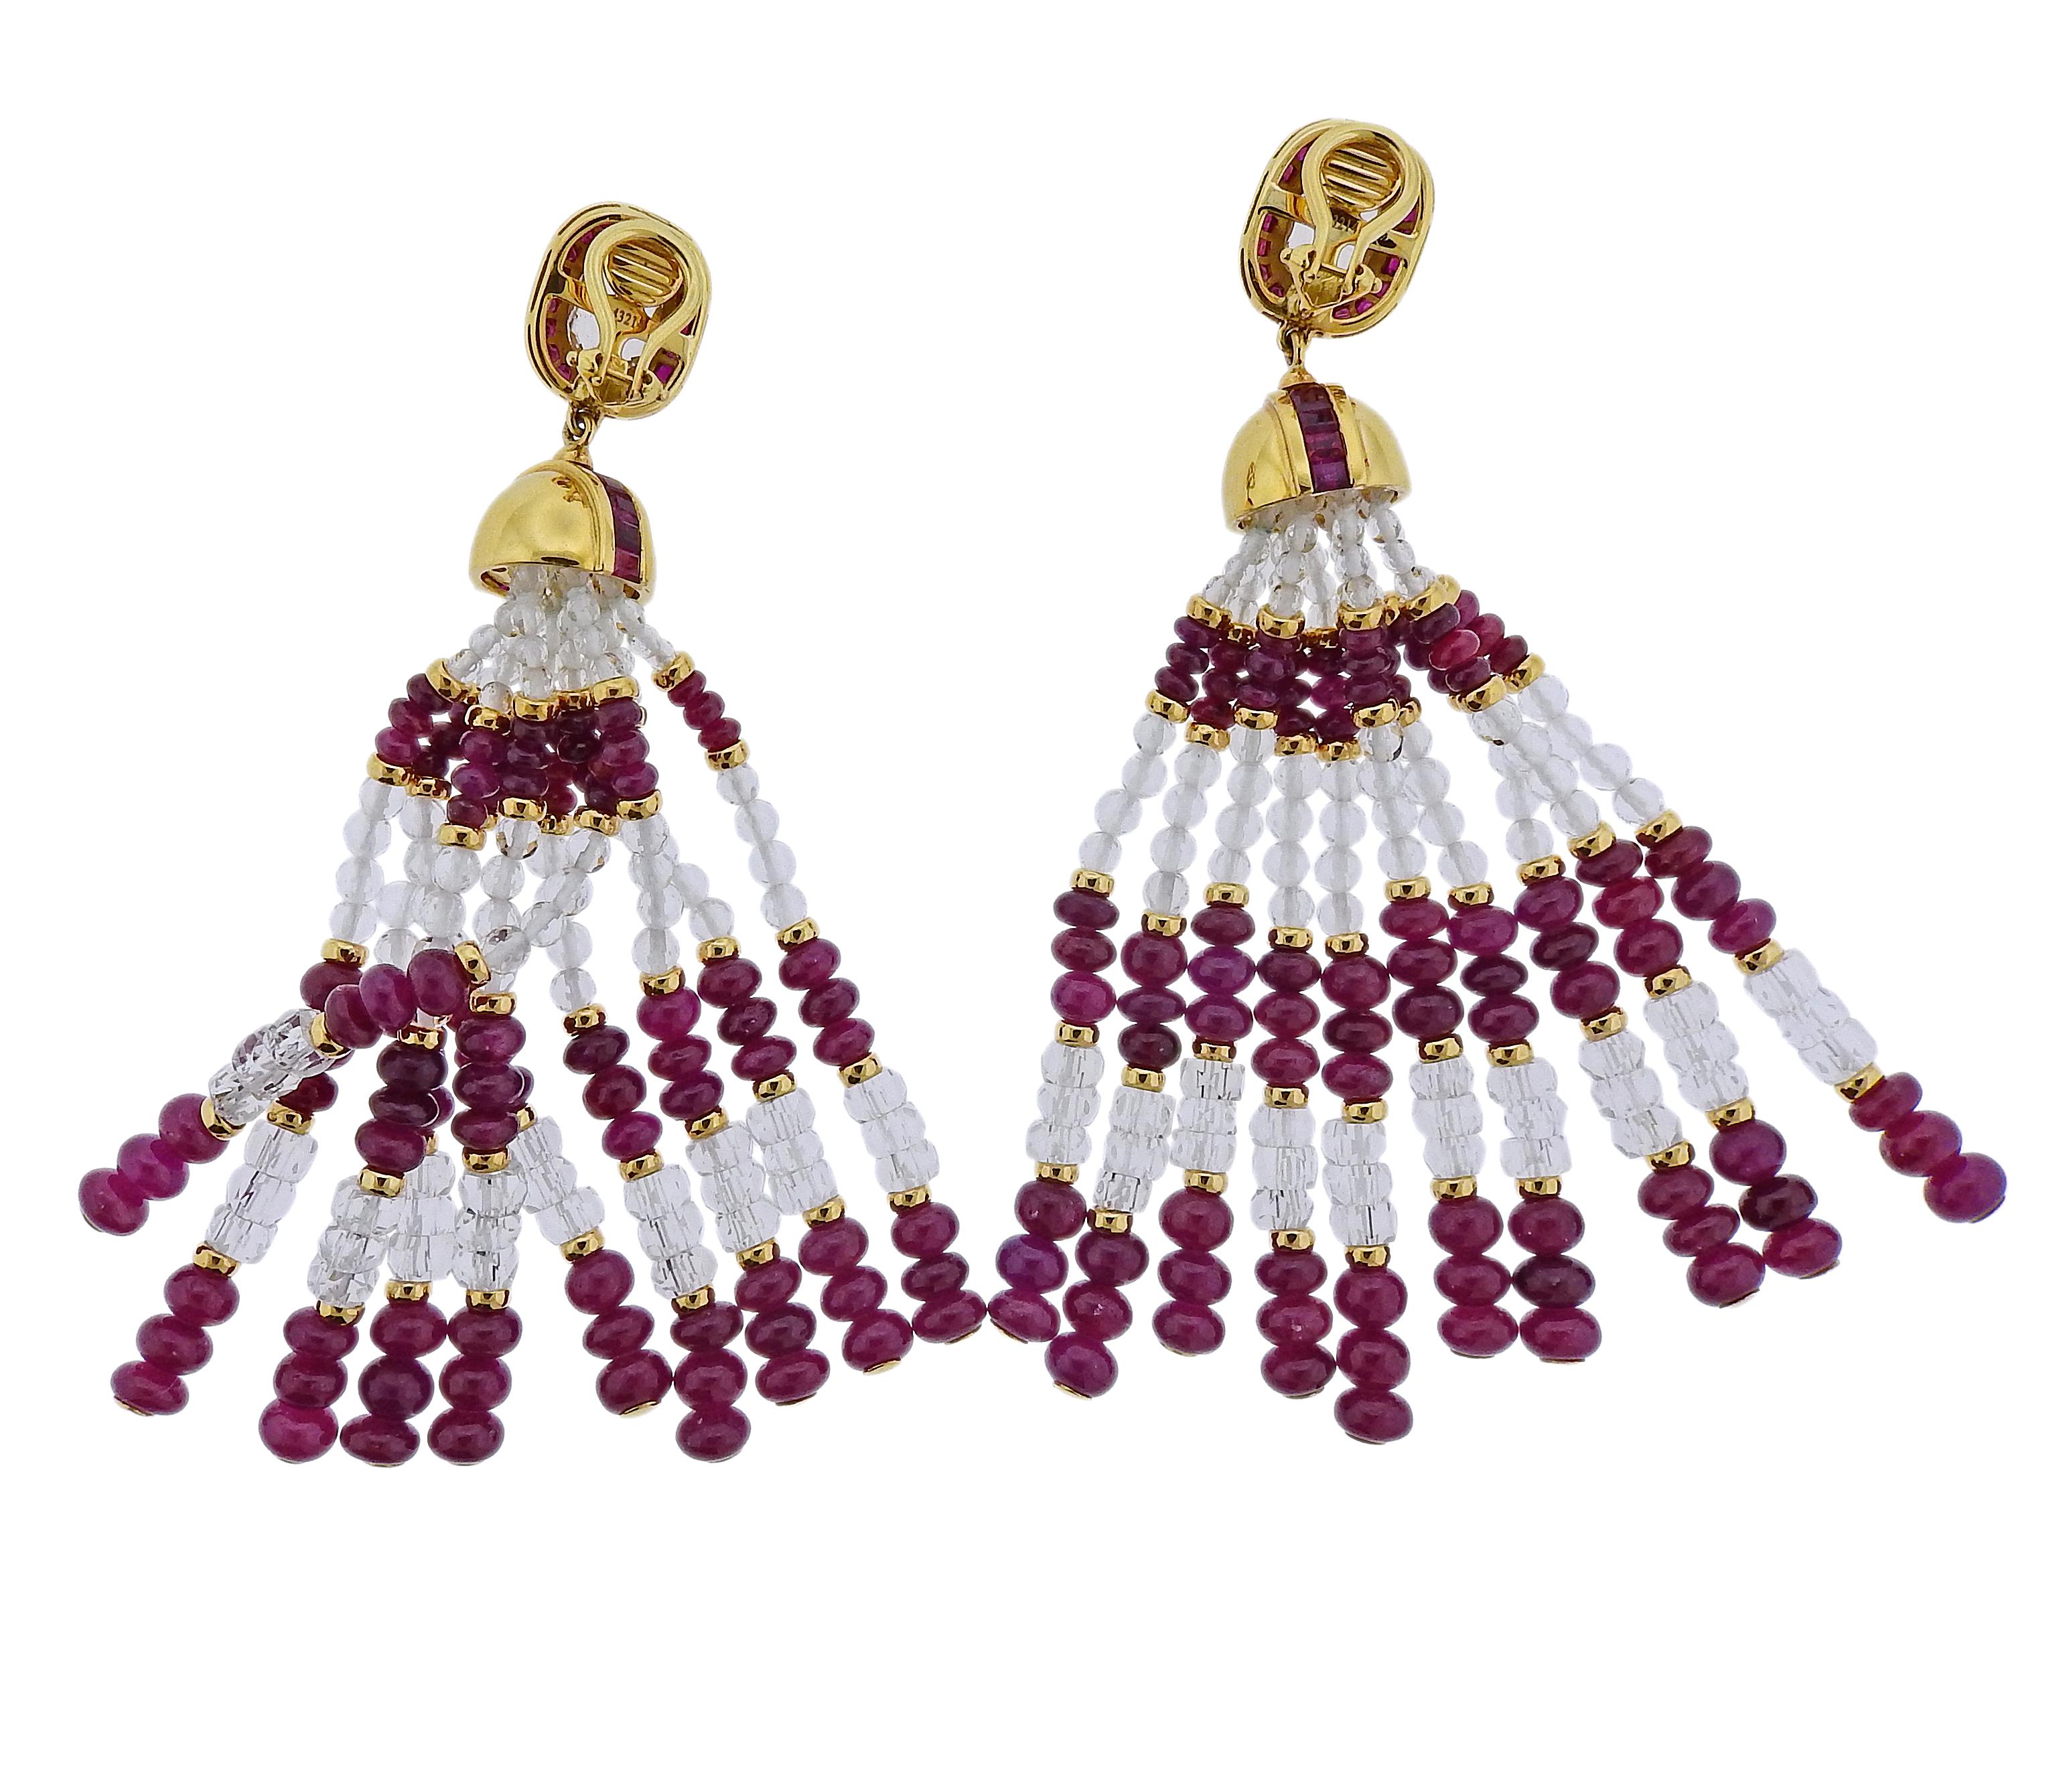 18k yellow gold long tassel drop earrings by Seaman Schepps, featuring crystal, ruby and crystal beads. Retail $26400. Earrings are 88mm long x approx. 20mm wide, weigh 50.8 grams. Marked: 750, Shell signature mark, 243214. 